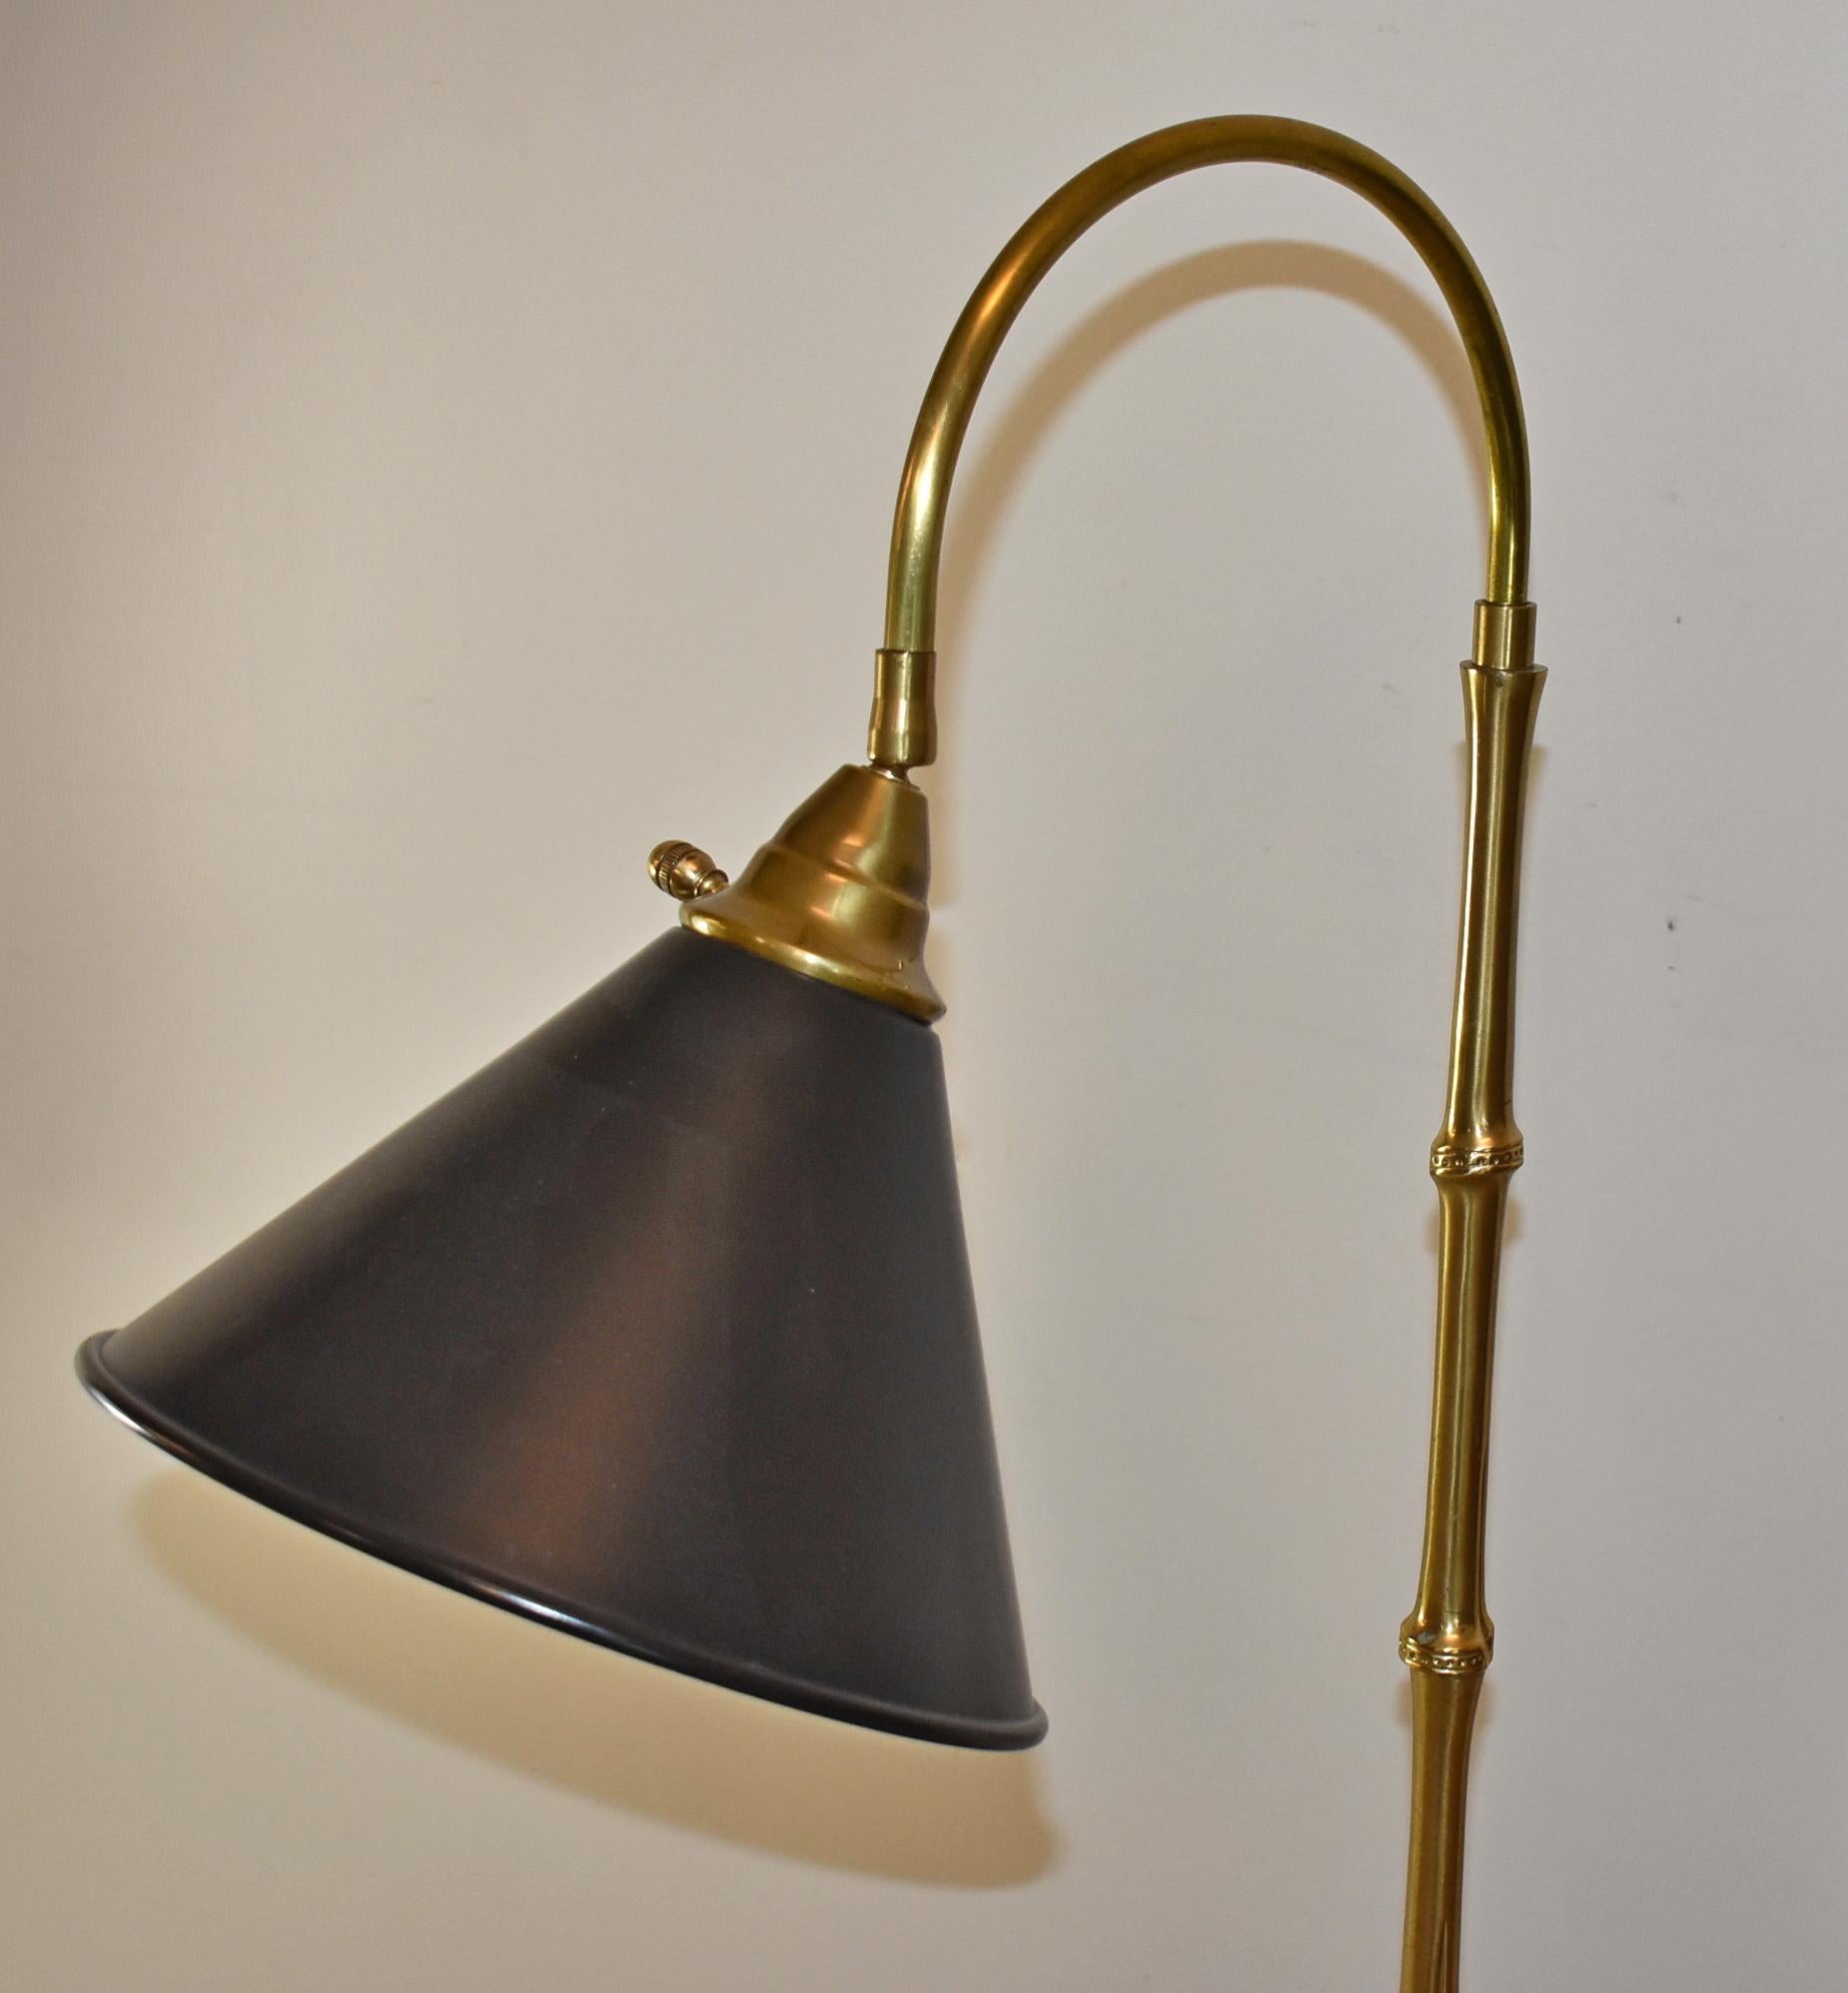 Vintage 1980s Mario Buatta for Frederick Cooper Faux Bamboo Brass and Enamel Shade Floor Lamp. Hollywood Regency Style. Brass lamps with weighted base and bamboo design stem. Black enamel metal shades that can be adjusted as shown in photos. Great